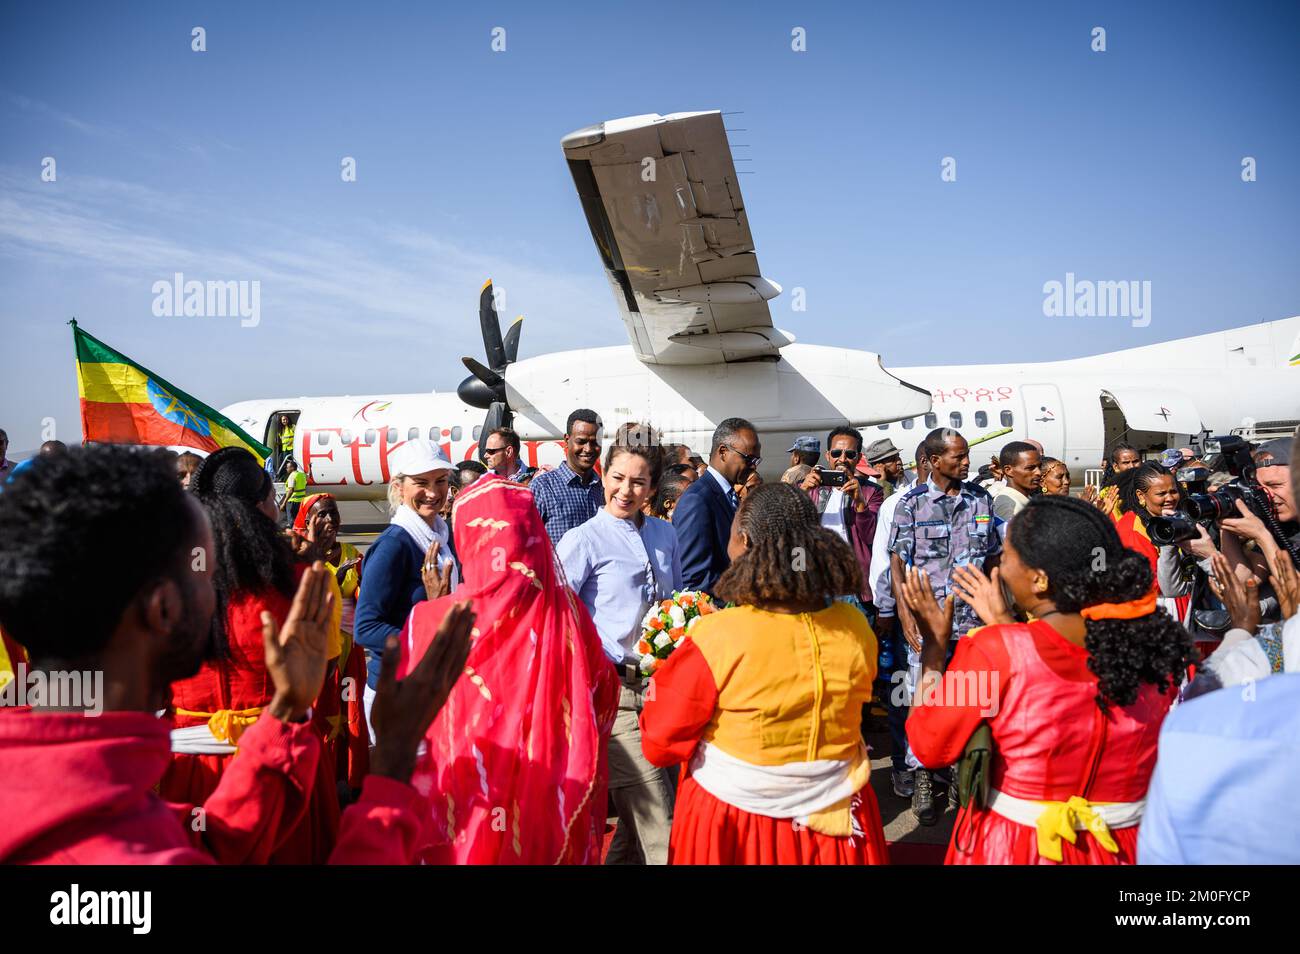 On March 27th 2019 Crown Princess Mary and Minister for Development Ulla Tørnes arrived in Ethiopia on a two day visit to promote equality and gender issues in the country. The second day they spend in the northern town of Shire. Here they were greeted by traditional dancers, visited a refugee camp and a school where they planted trees with the pupils. As a conclusion of the visit they had dinner with the first female President Sahle-Work Zewde. Stock Photo